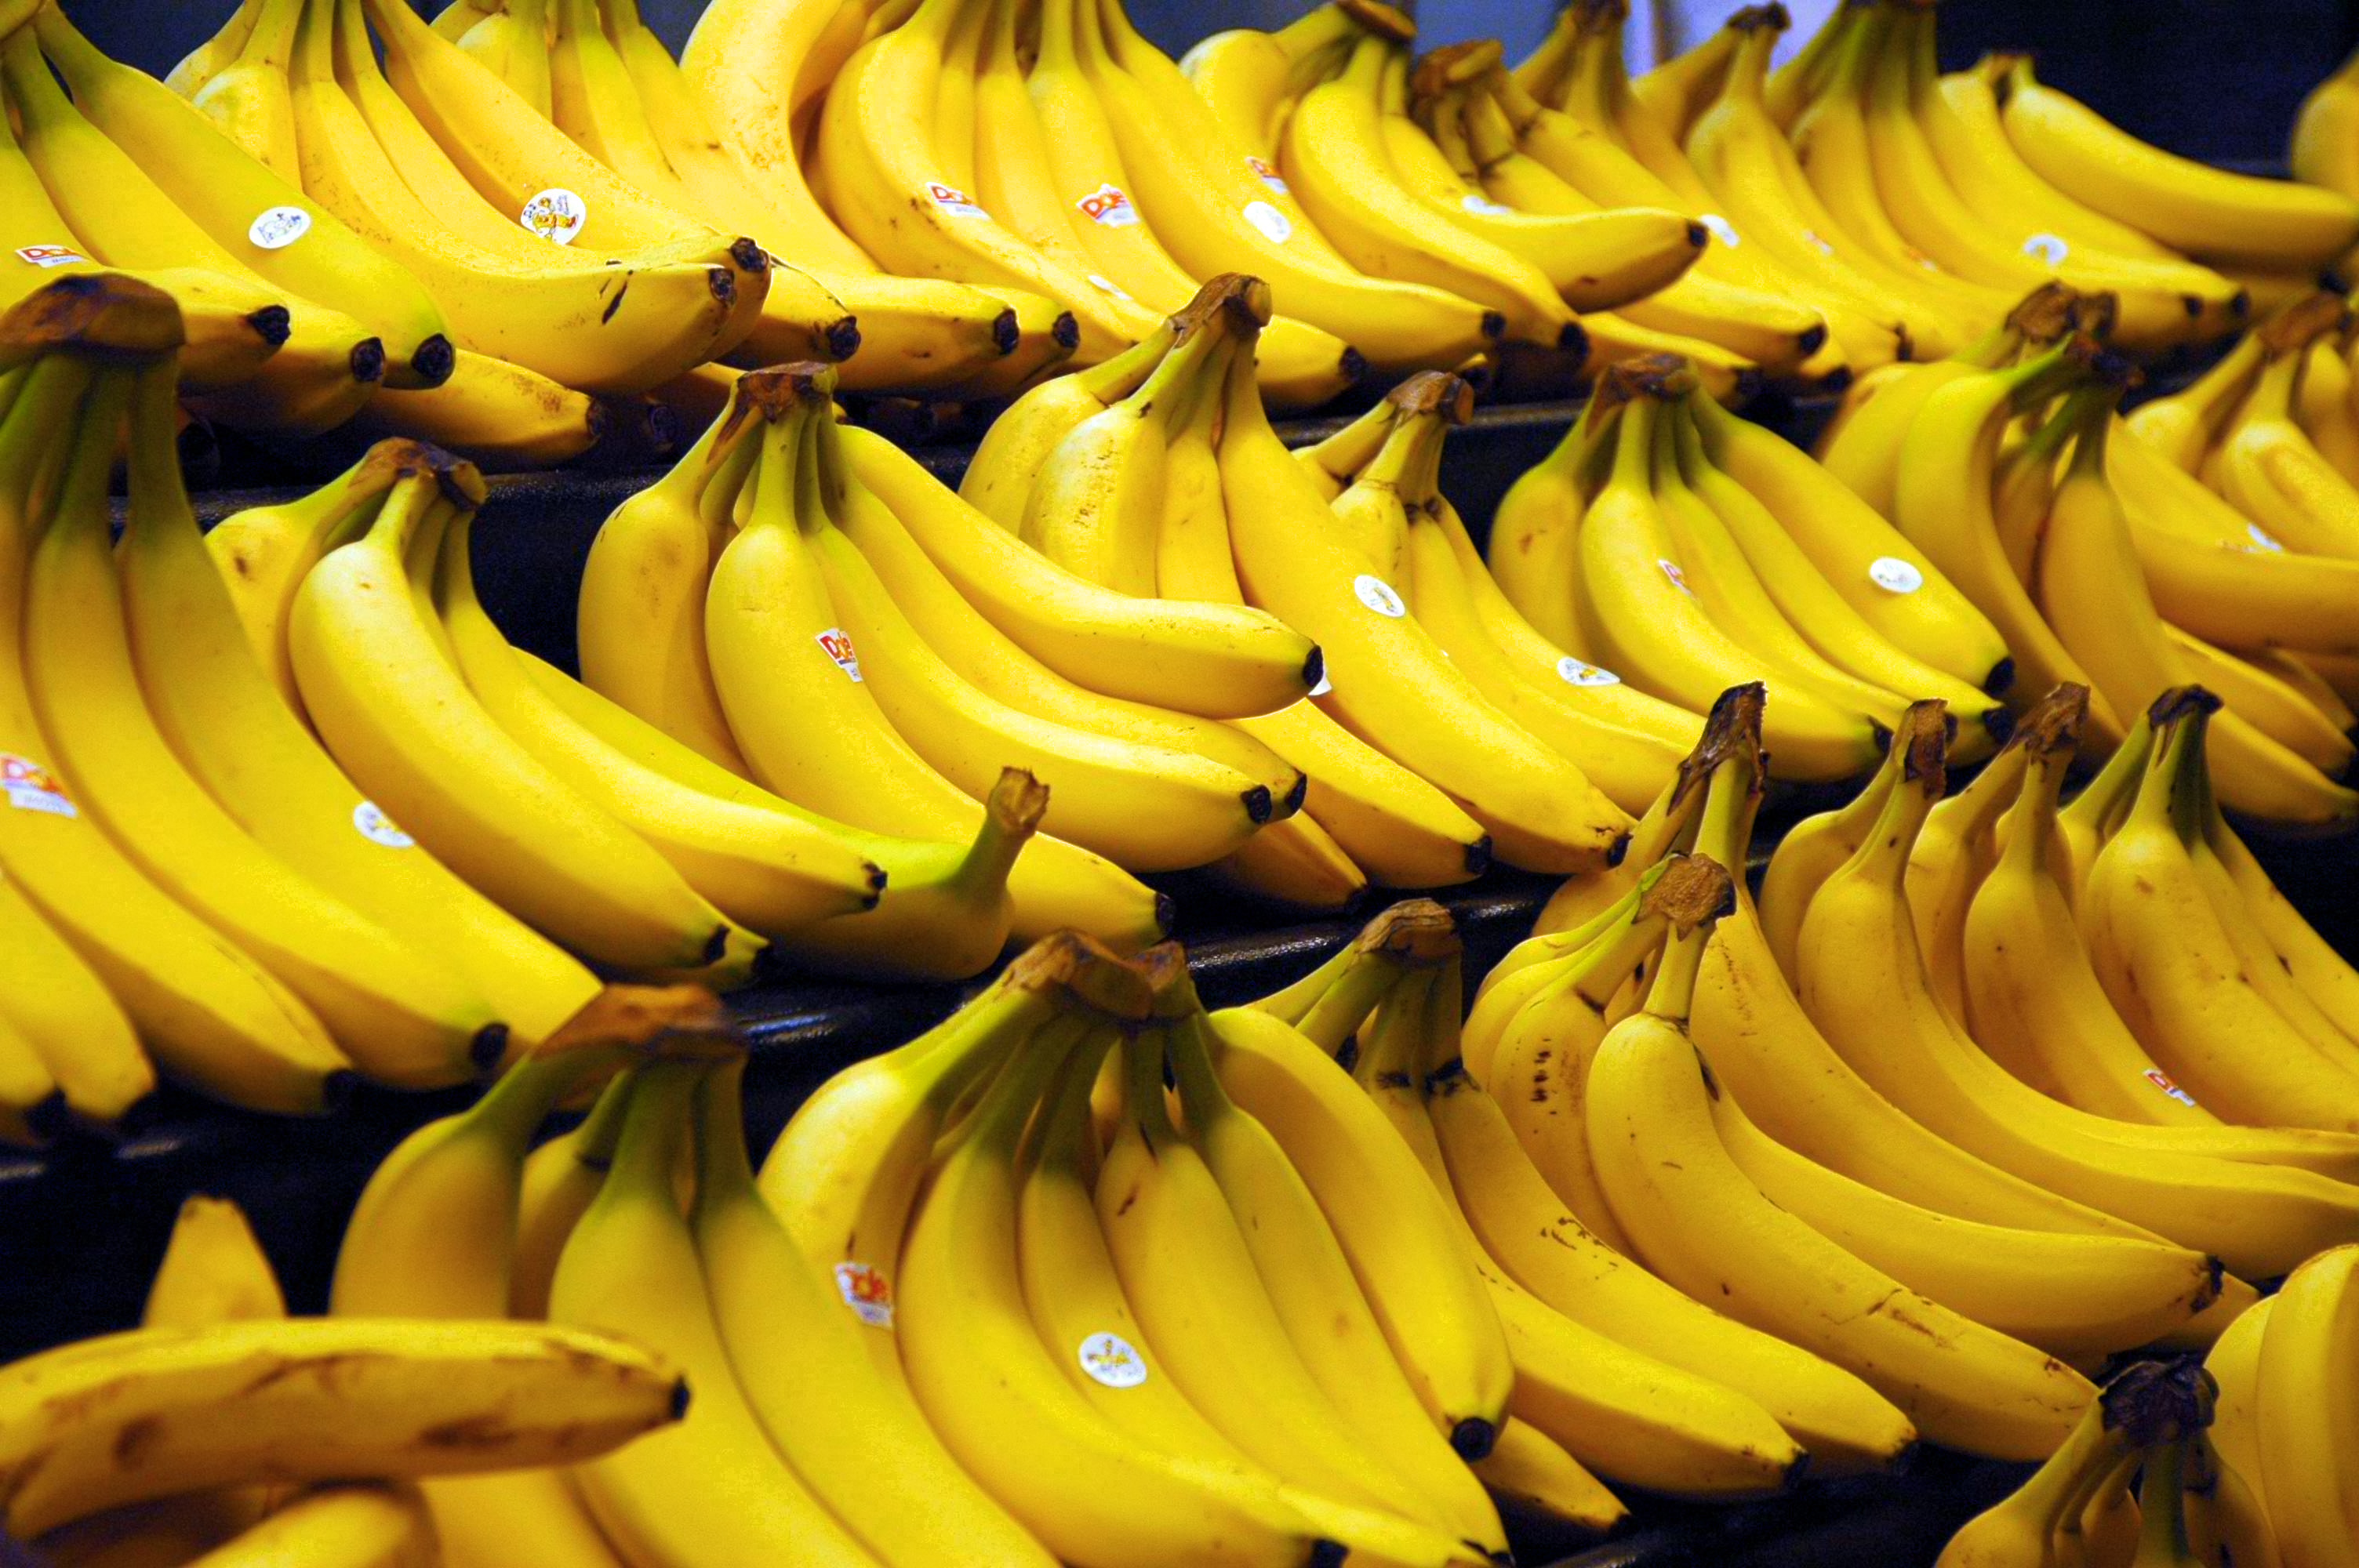 WHY DO BANANAS GO BAD FASTER IN THE REFRIGERATOR?